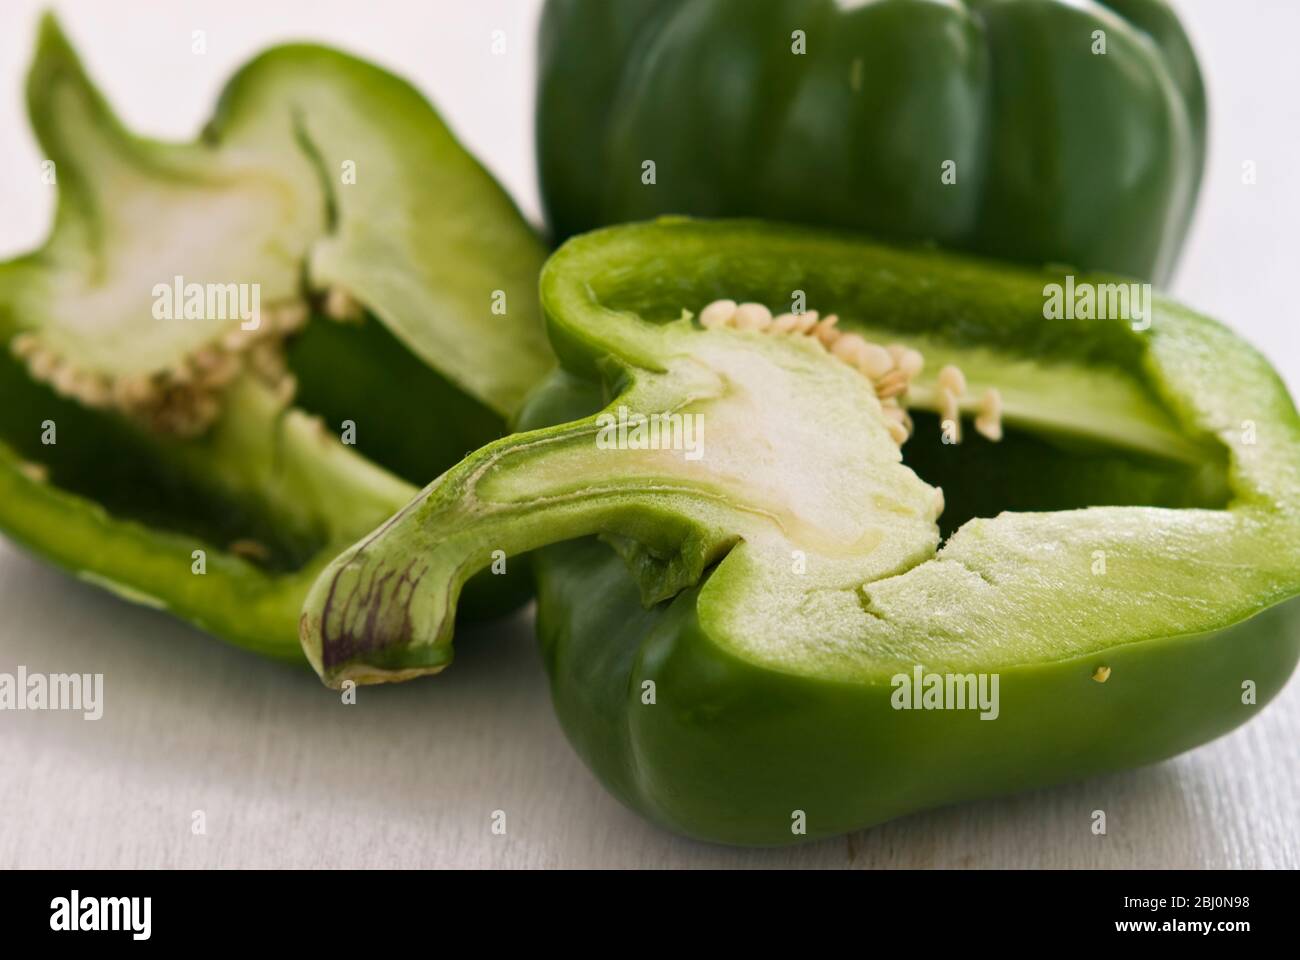 Shiny green sweet peppers, whole and cut in half. - - - Stock Photo